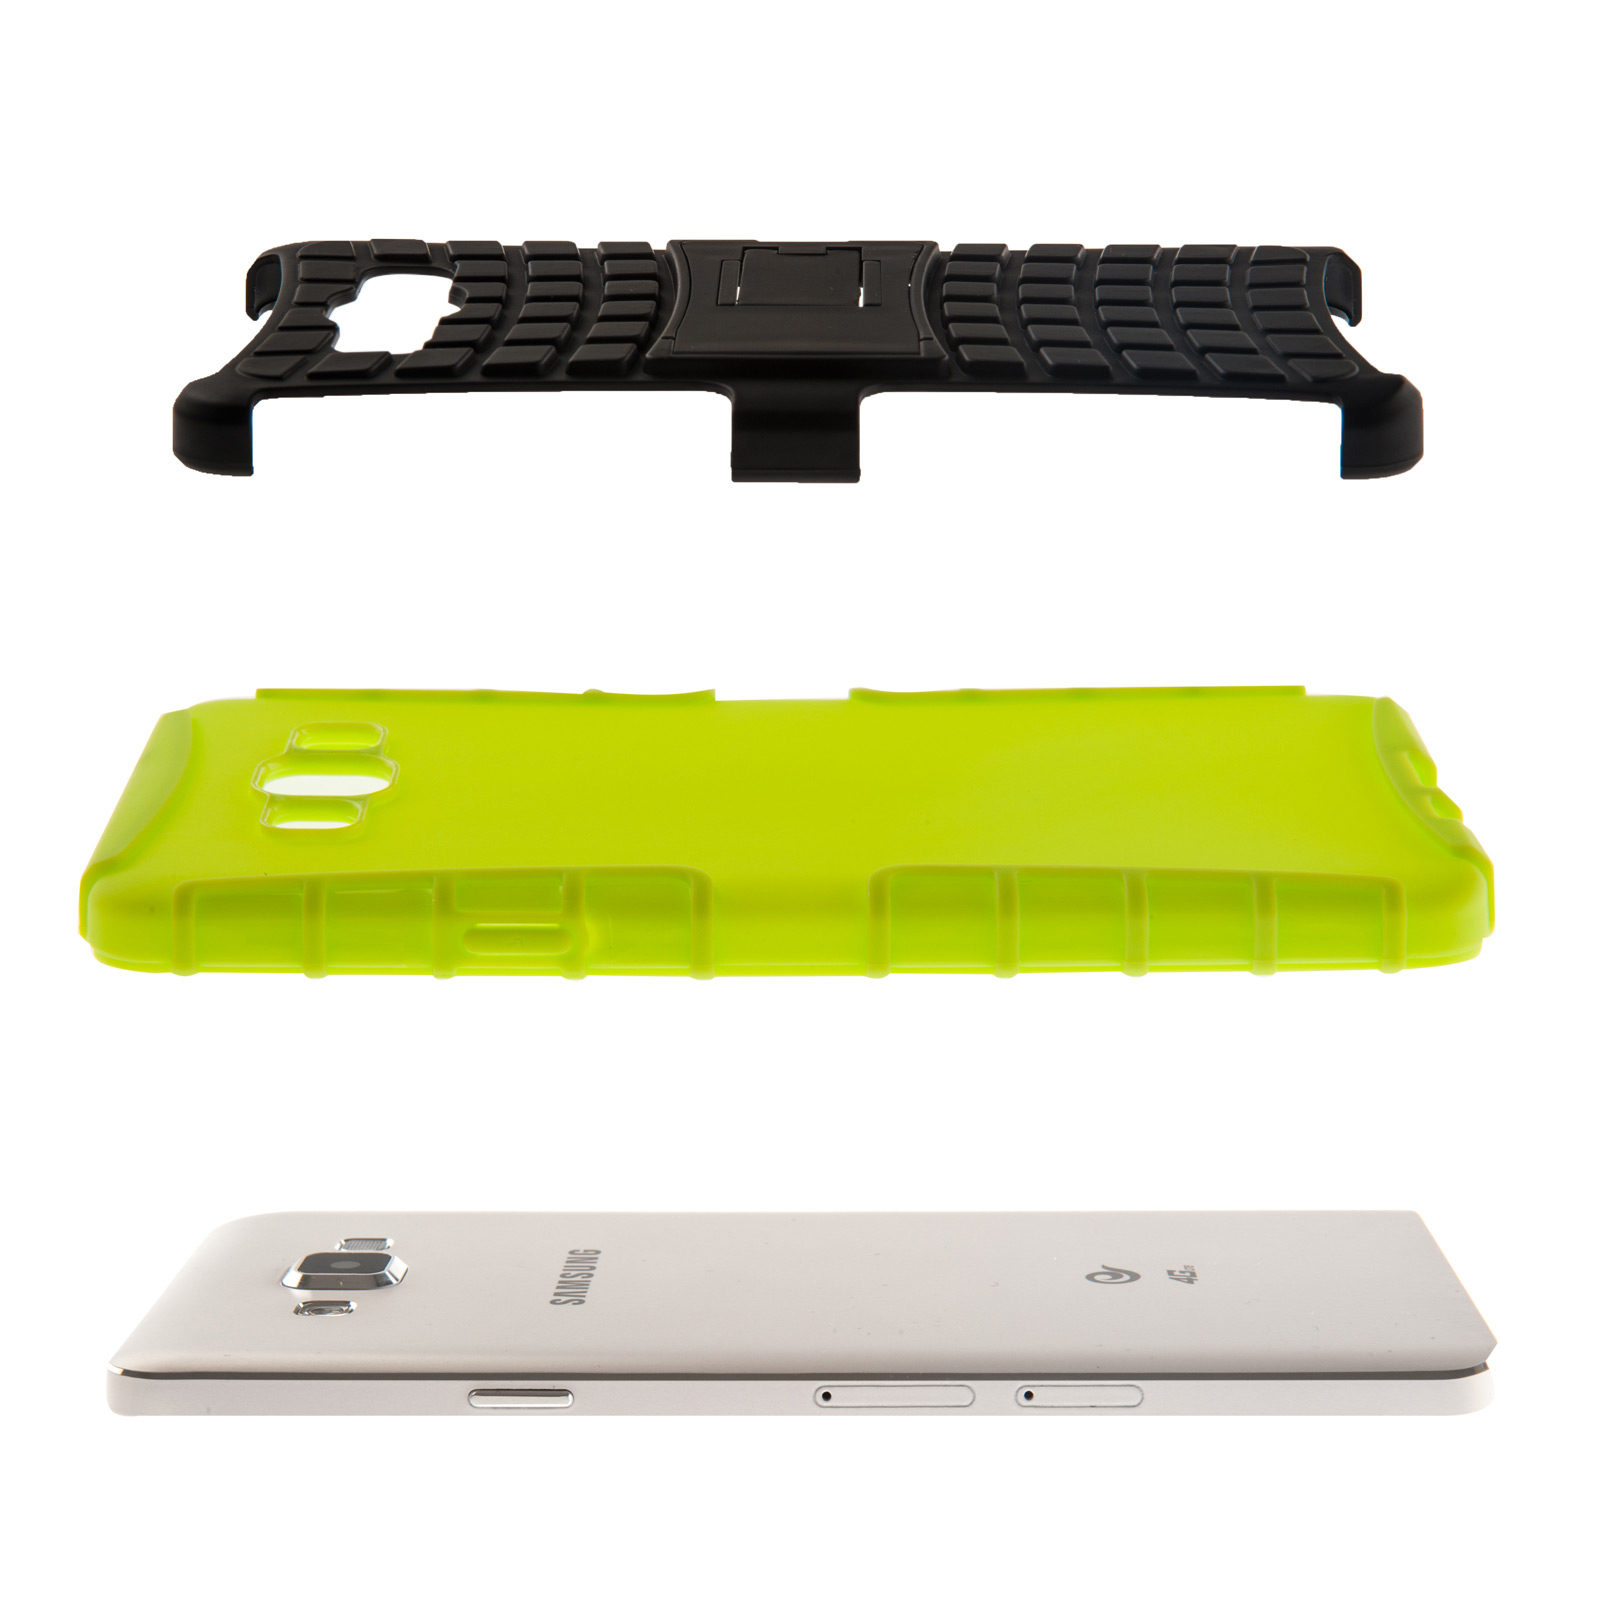 YouSave Samsung Galaxy A7 Stand Combo Case - Green / Black